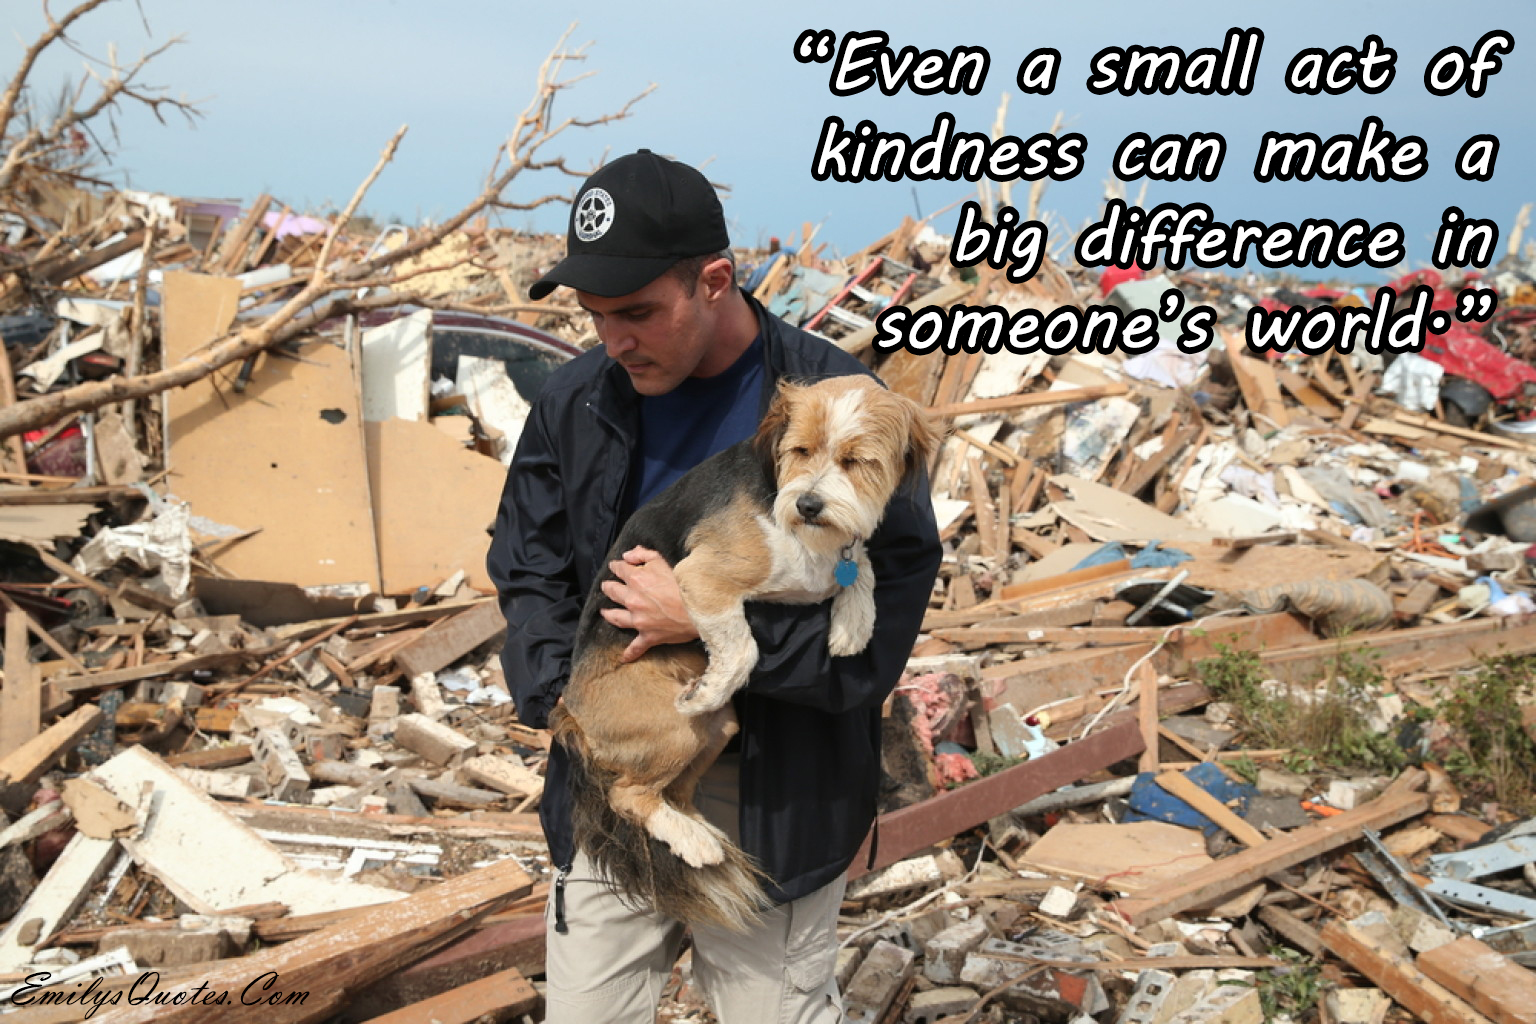 Even a small act of kindness can make a big difference in someone’s world